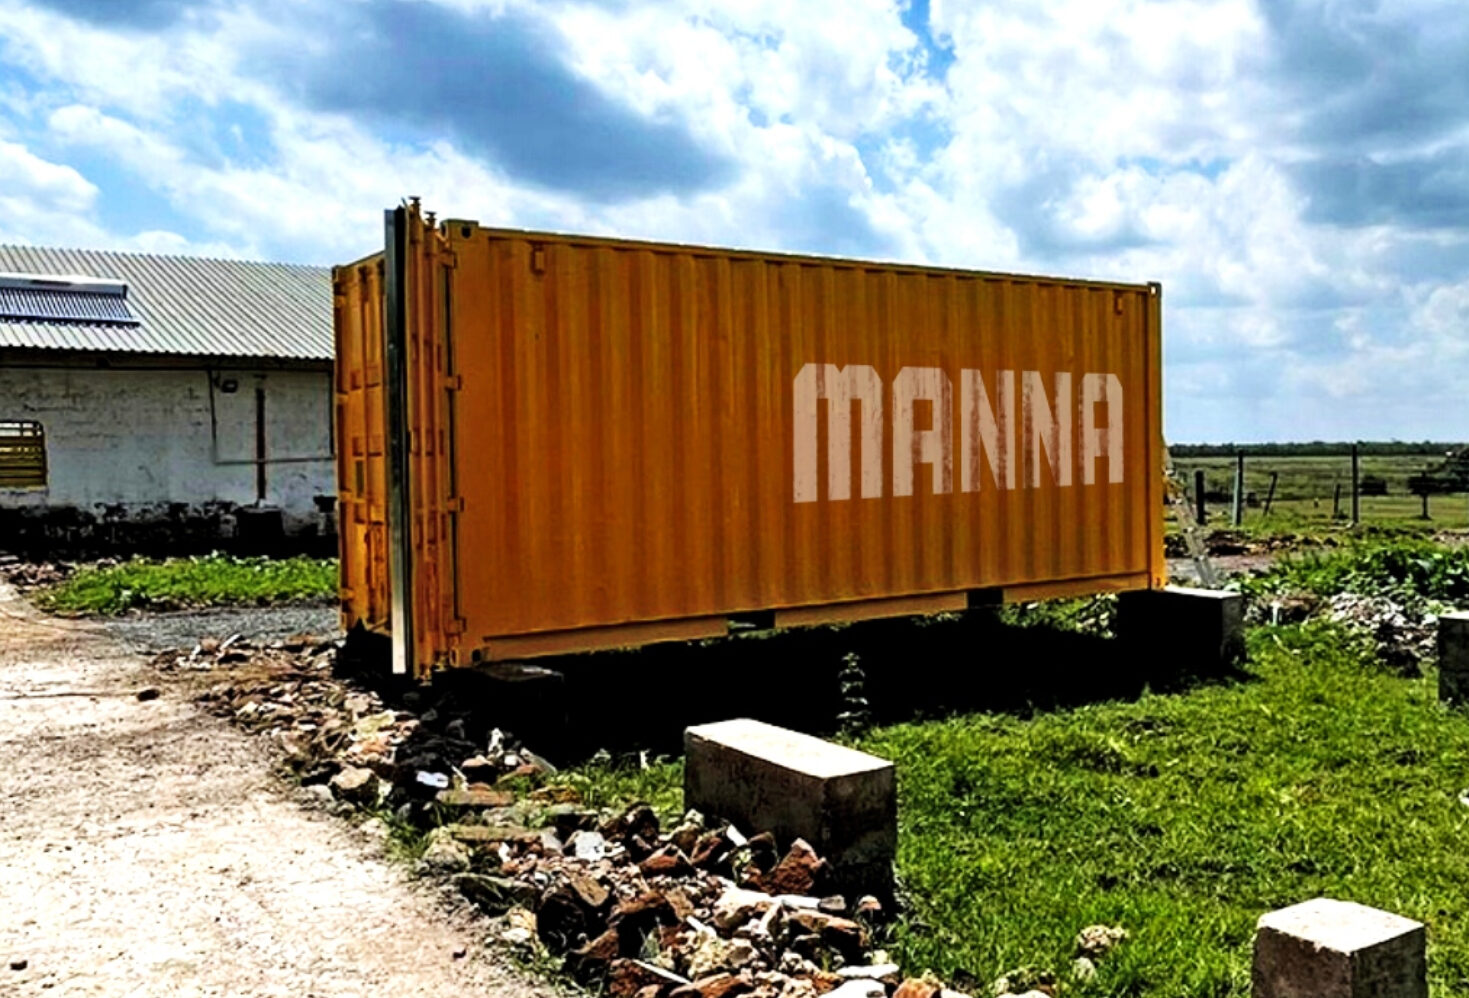 Manna Insect containers in Kenya. Photo: Manna Insect